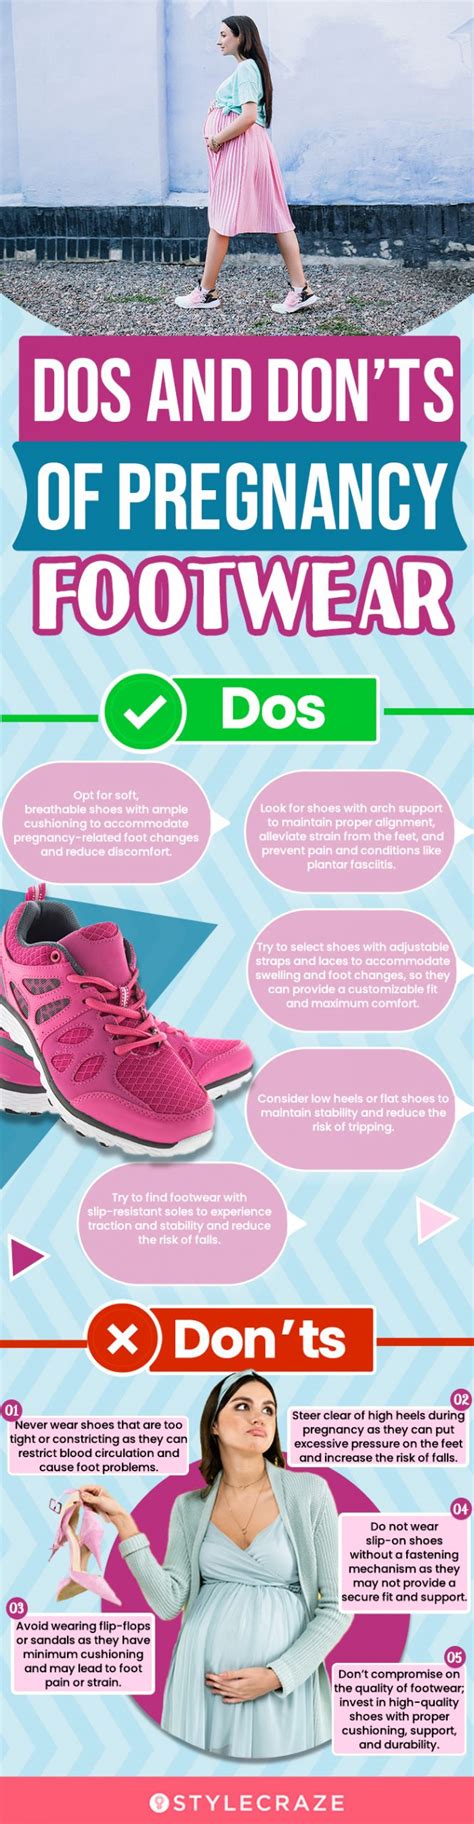 11 Best Shoes For Pregnancy That Are Stylish And Offer Arch Support